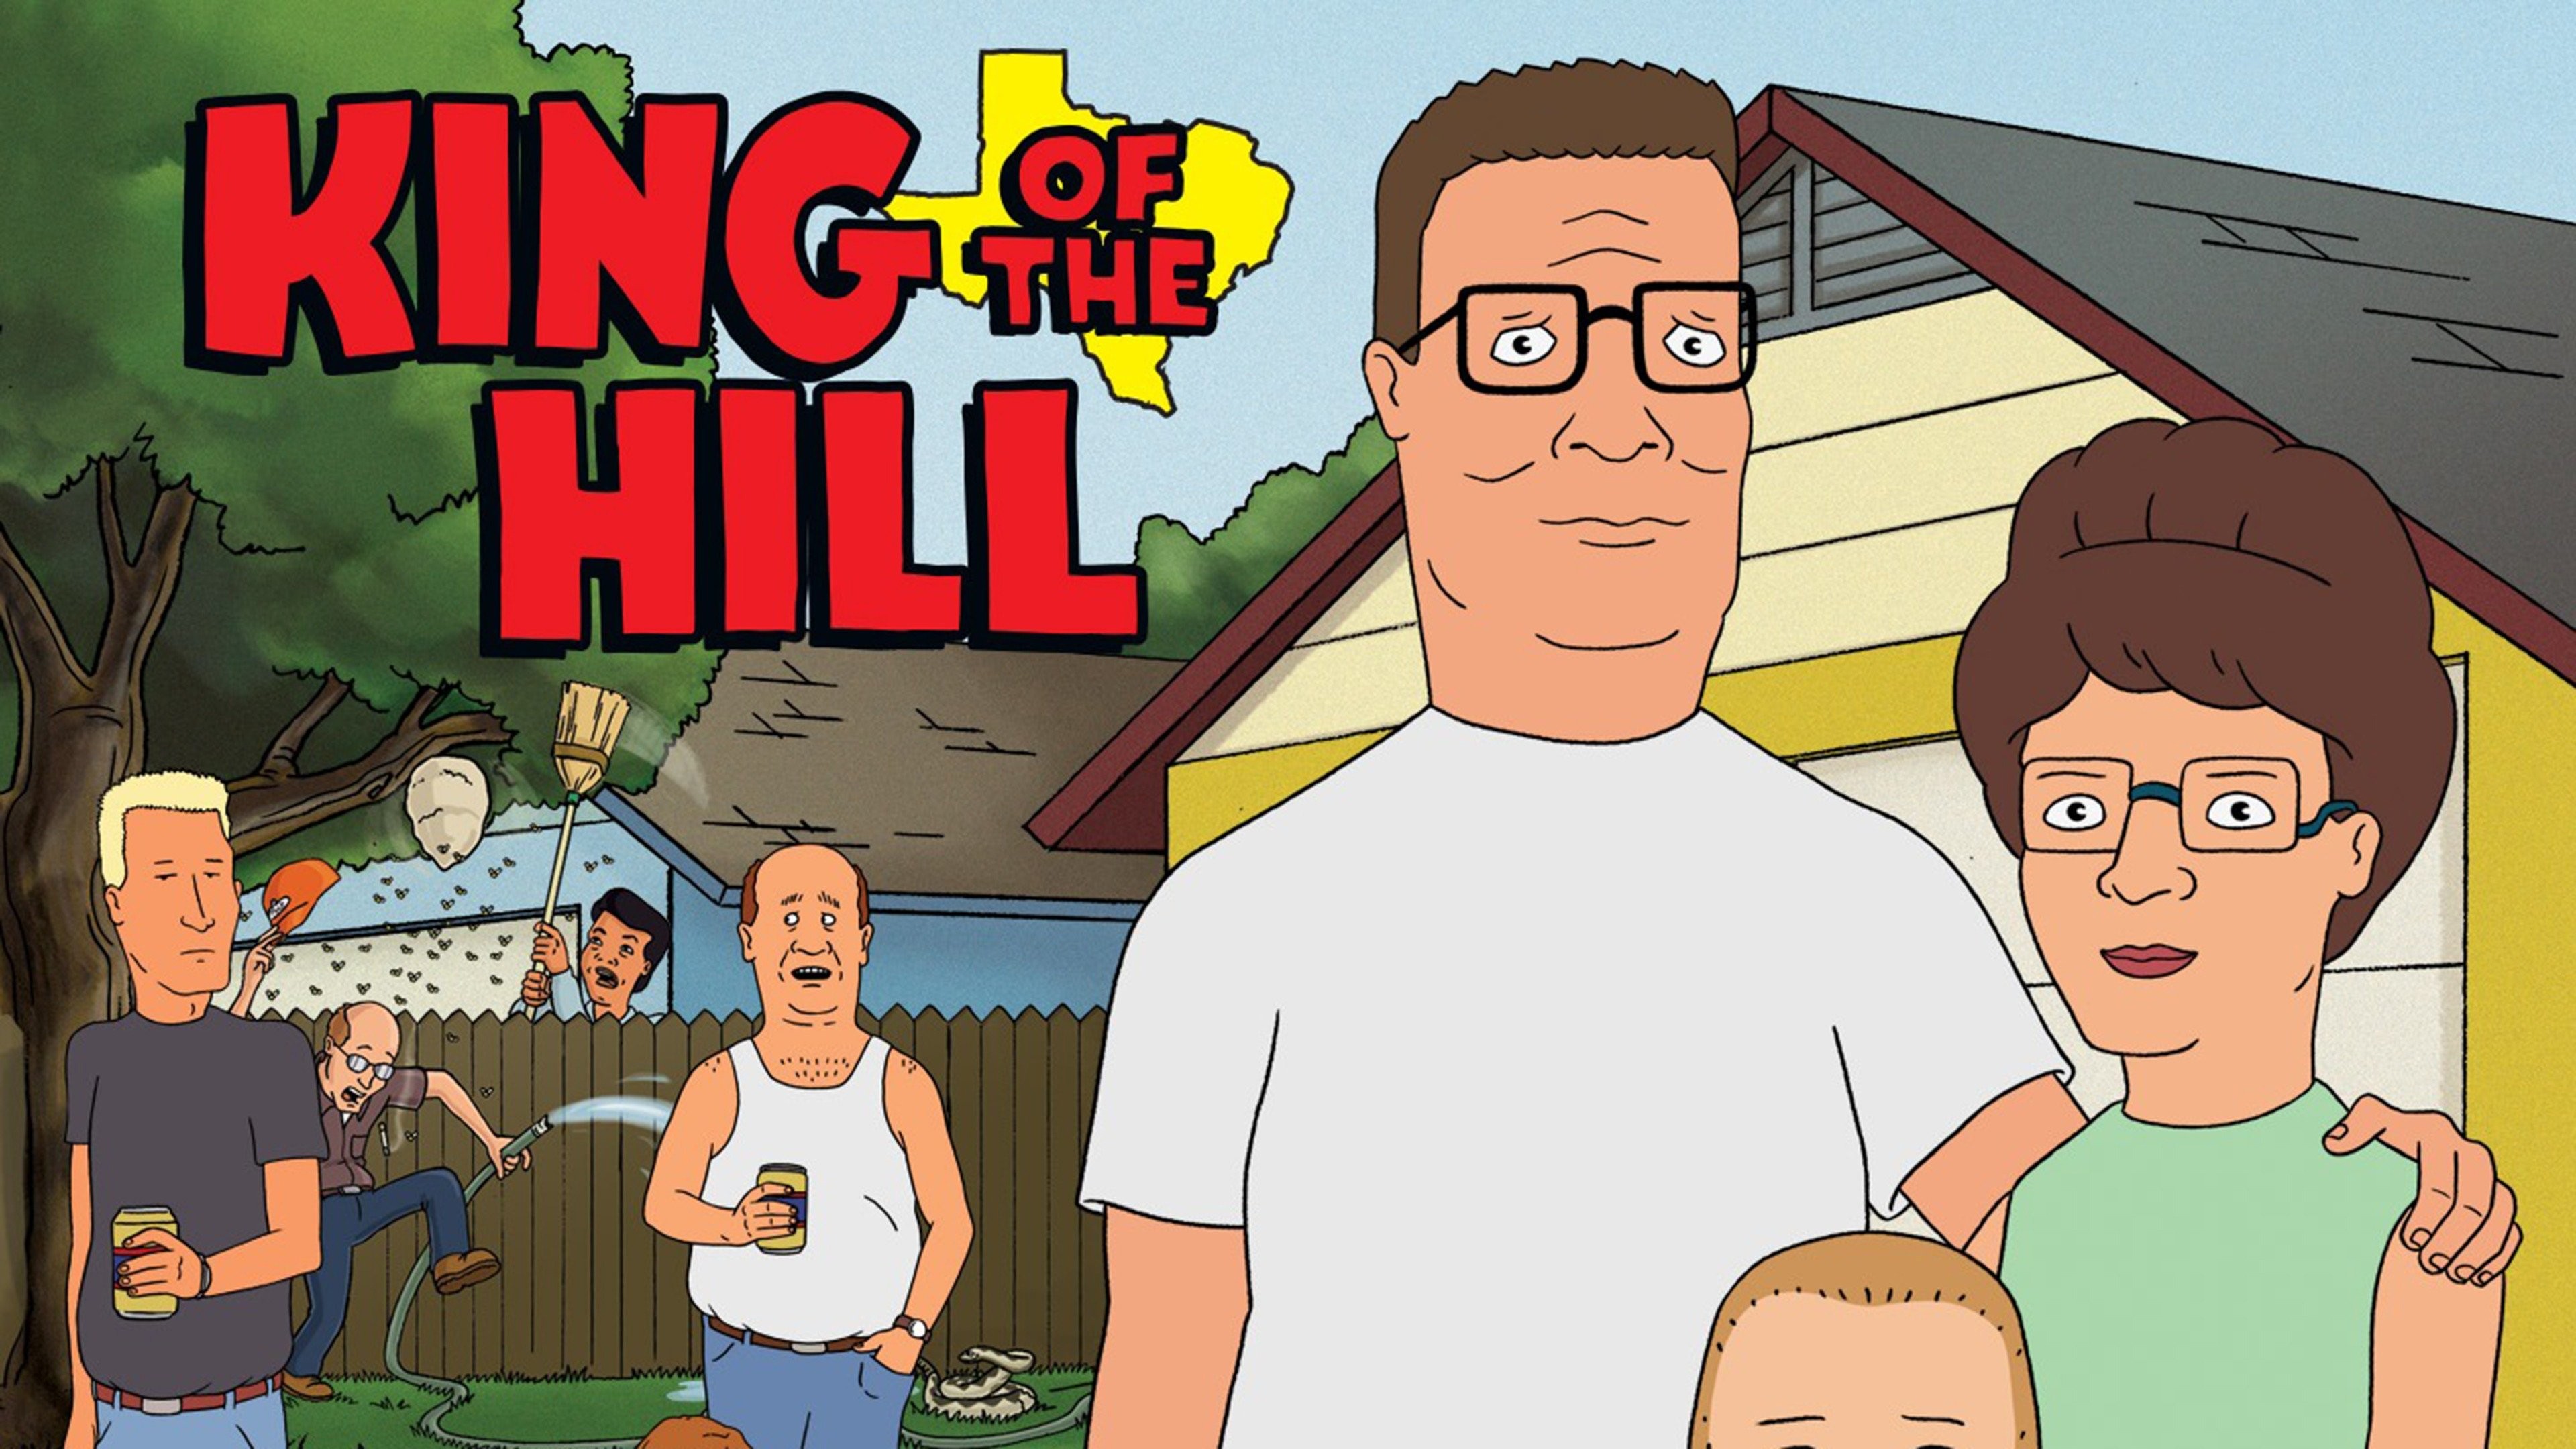 King of the Hill Six Characters in Search of a House (TV Episode 2008) -  IMDb